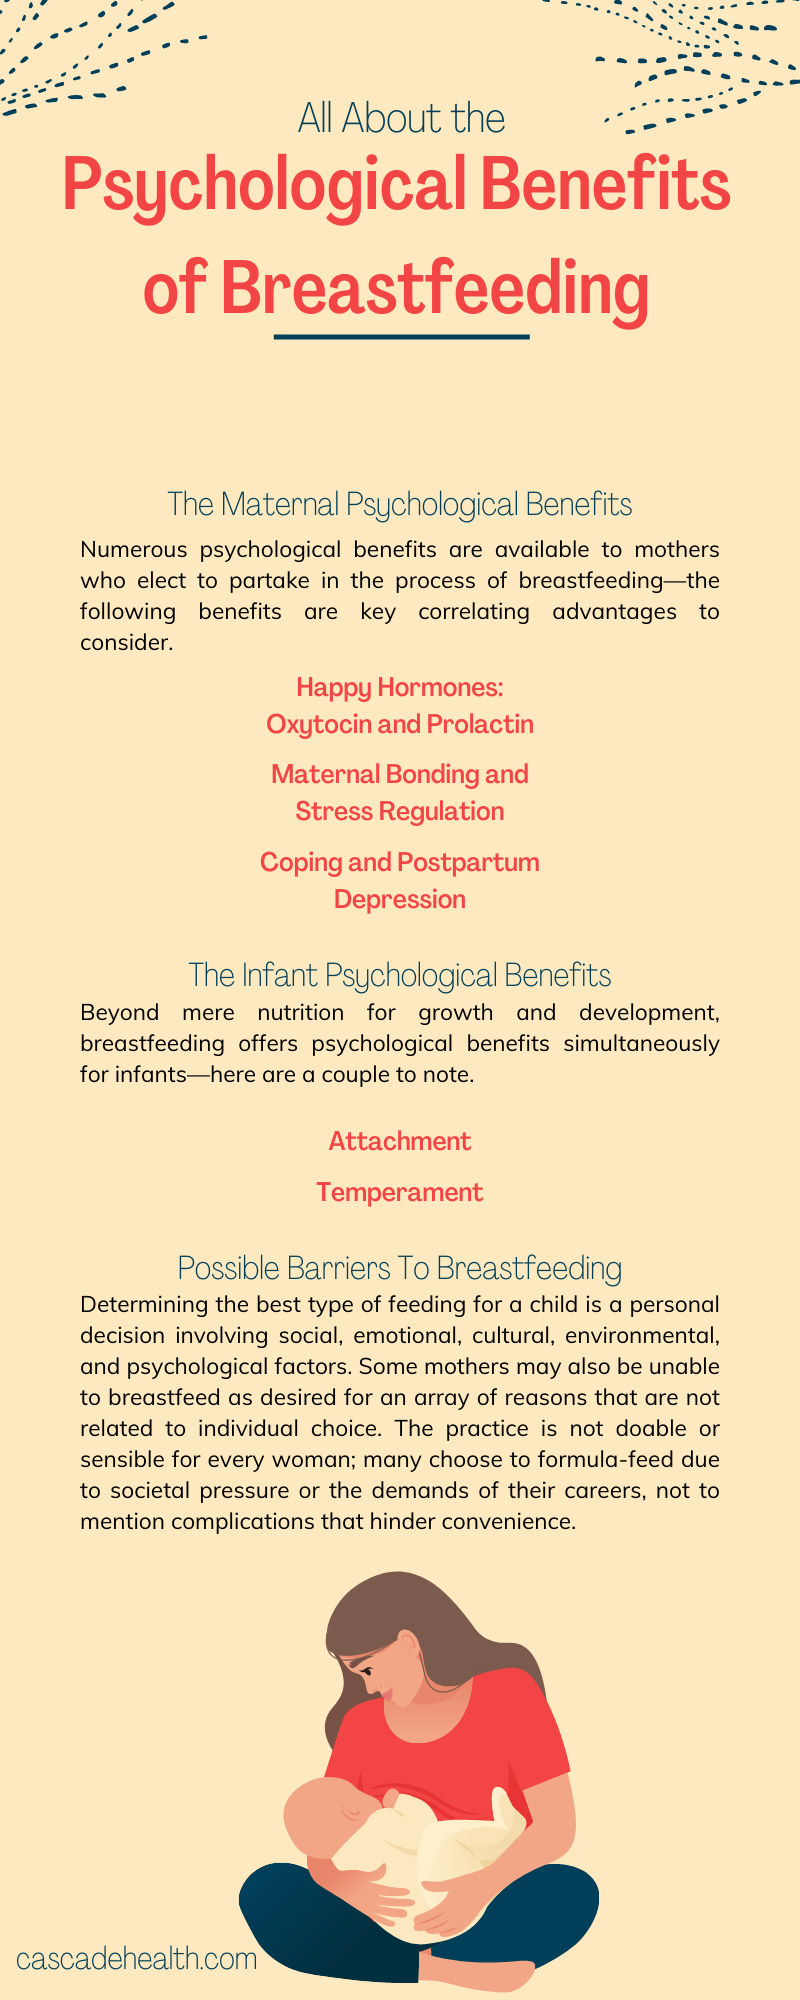 All About the Psychological Benefits of Breastfeeding